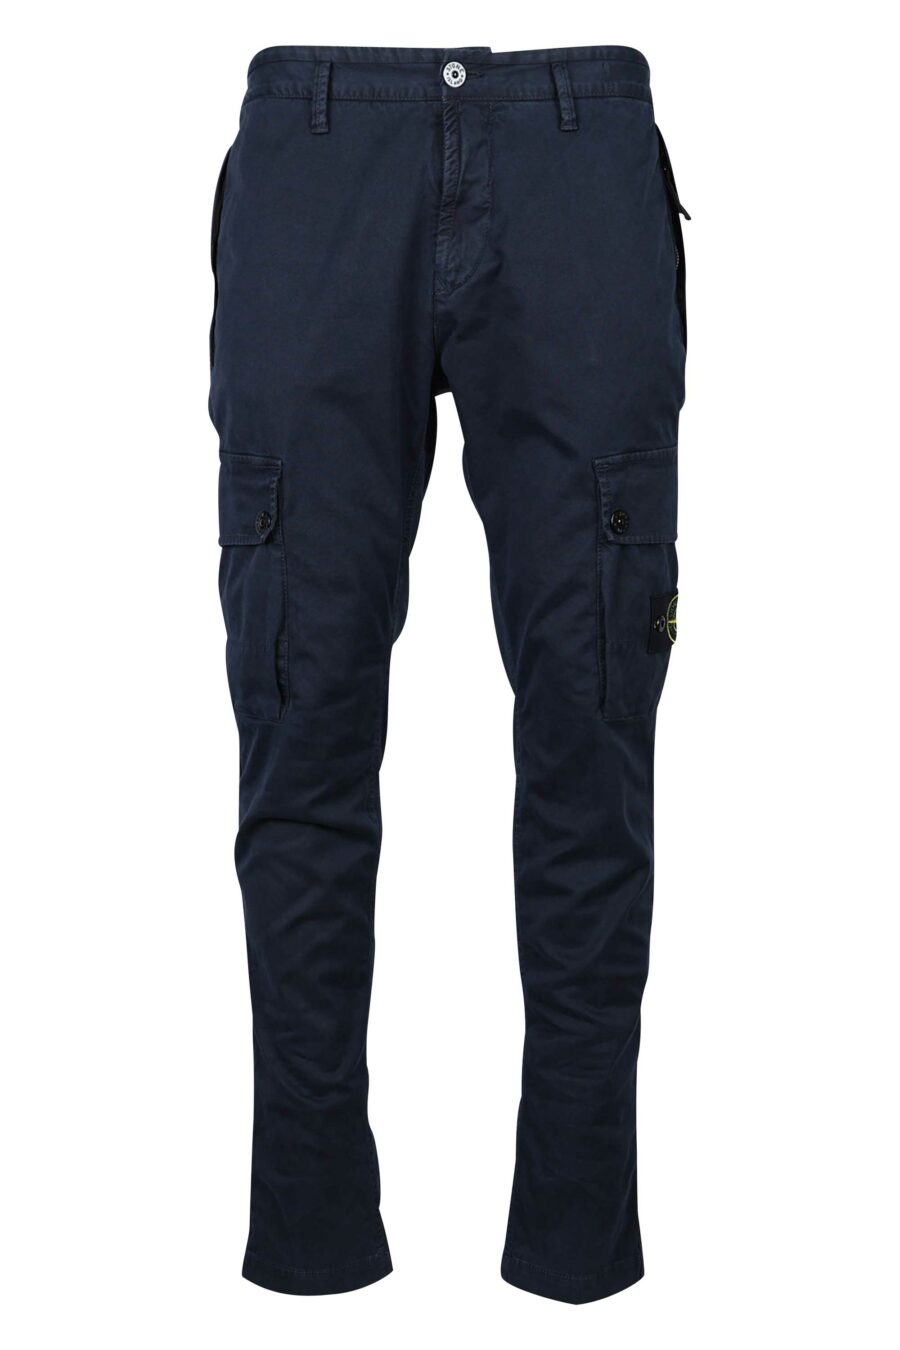 Blue slim trousers with side logo patch - 8052572735042